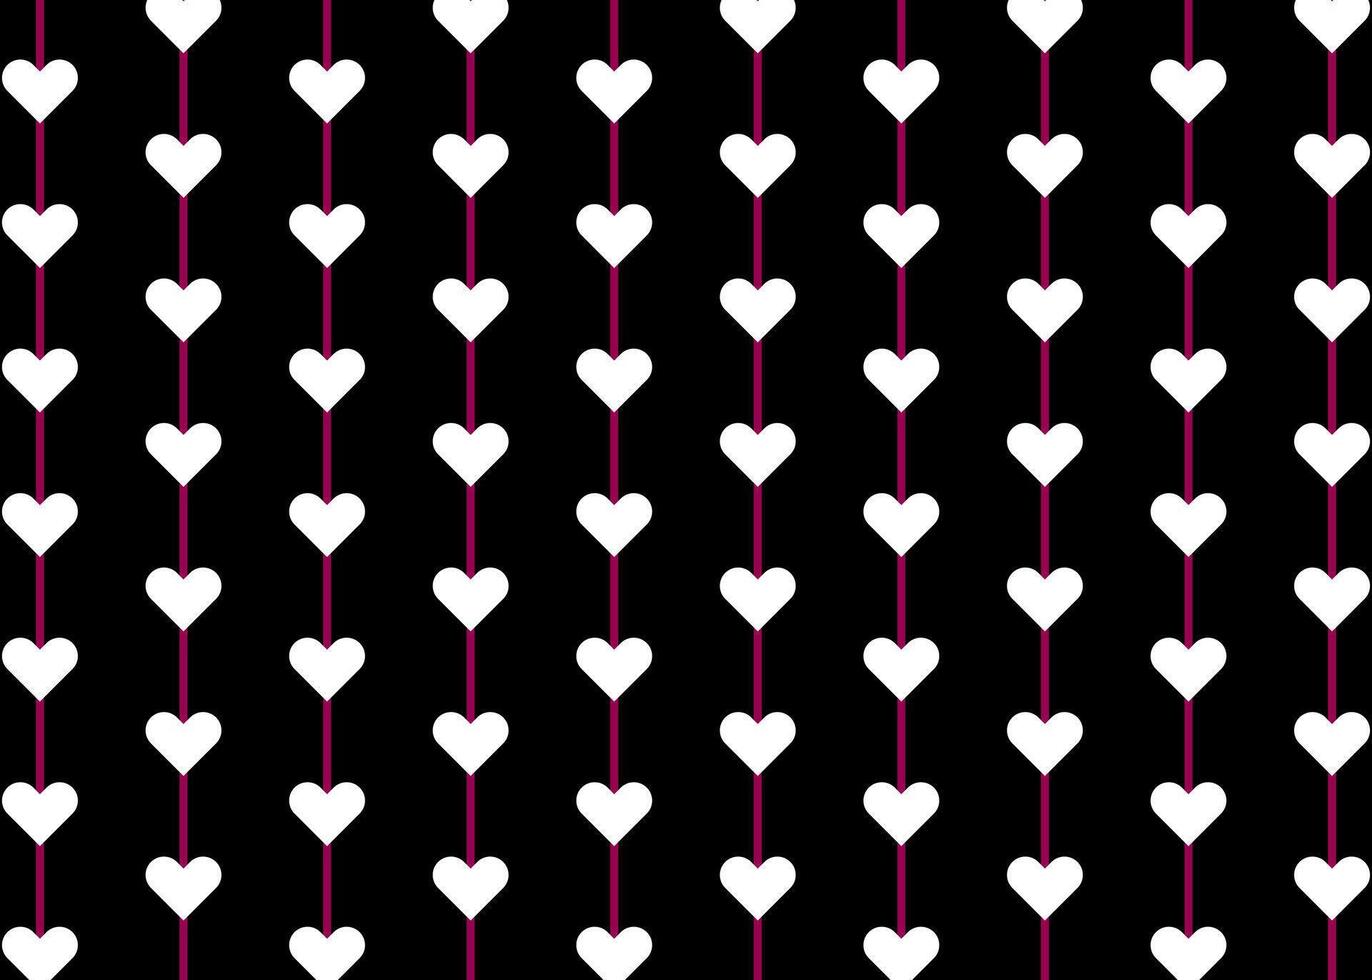 white pink and black hanging hearts on line garlands pattern love wallpaper vector